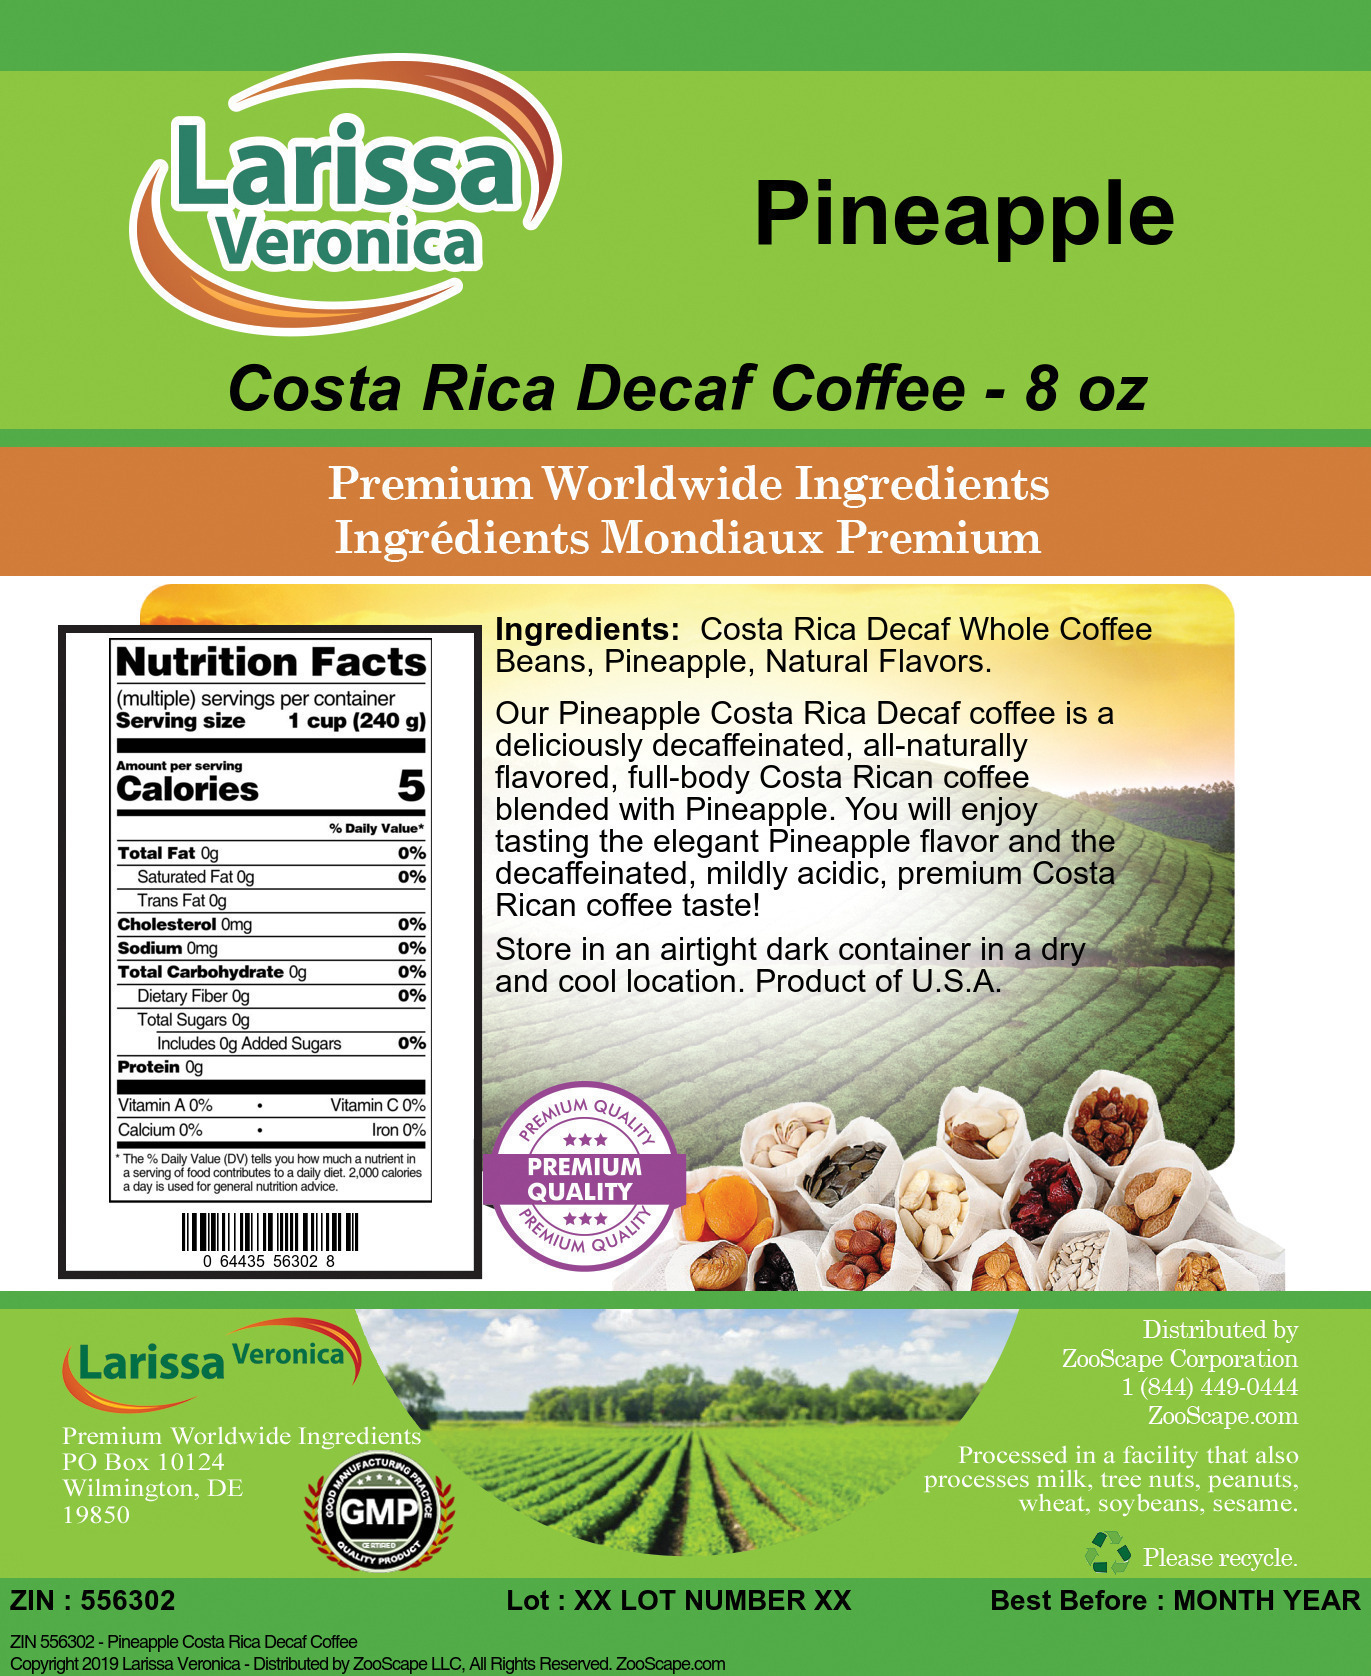 Pineapple Costa Rica Decaf Coffee - Label